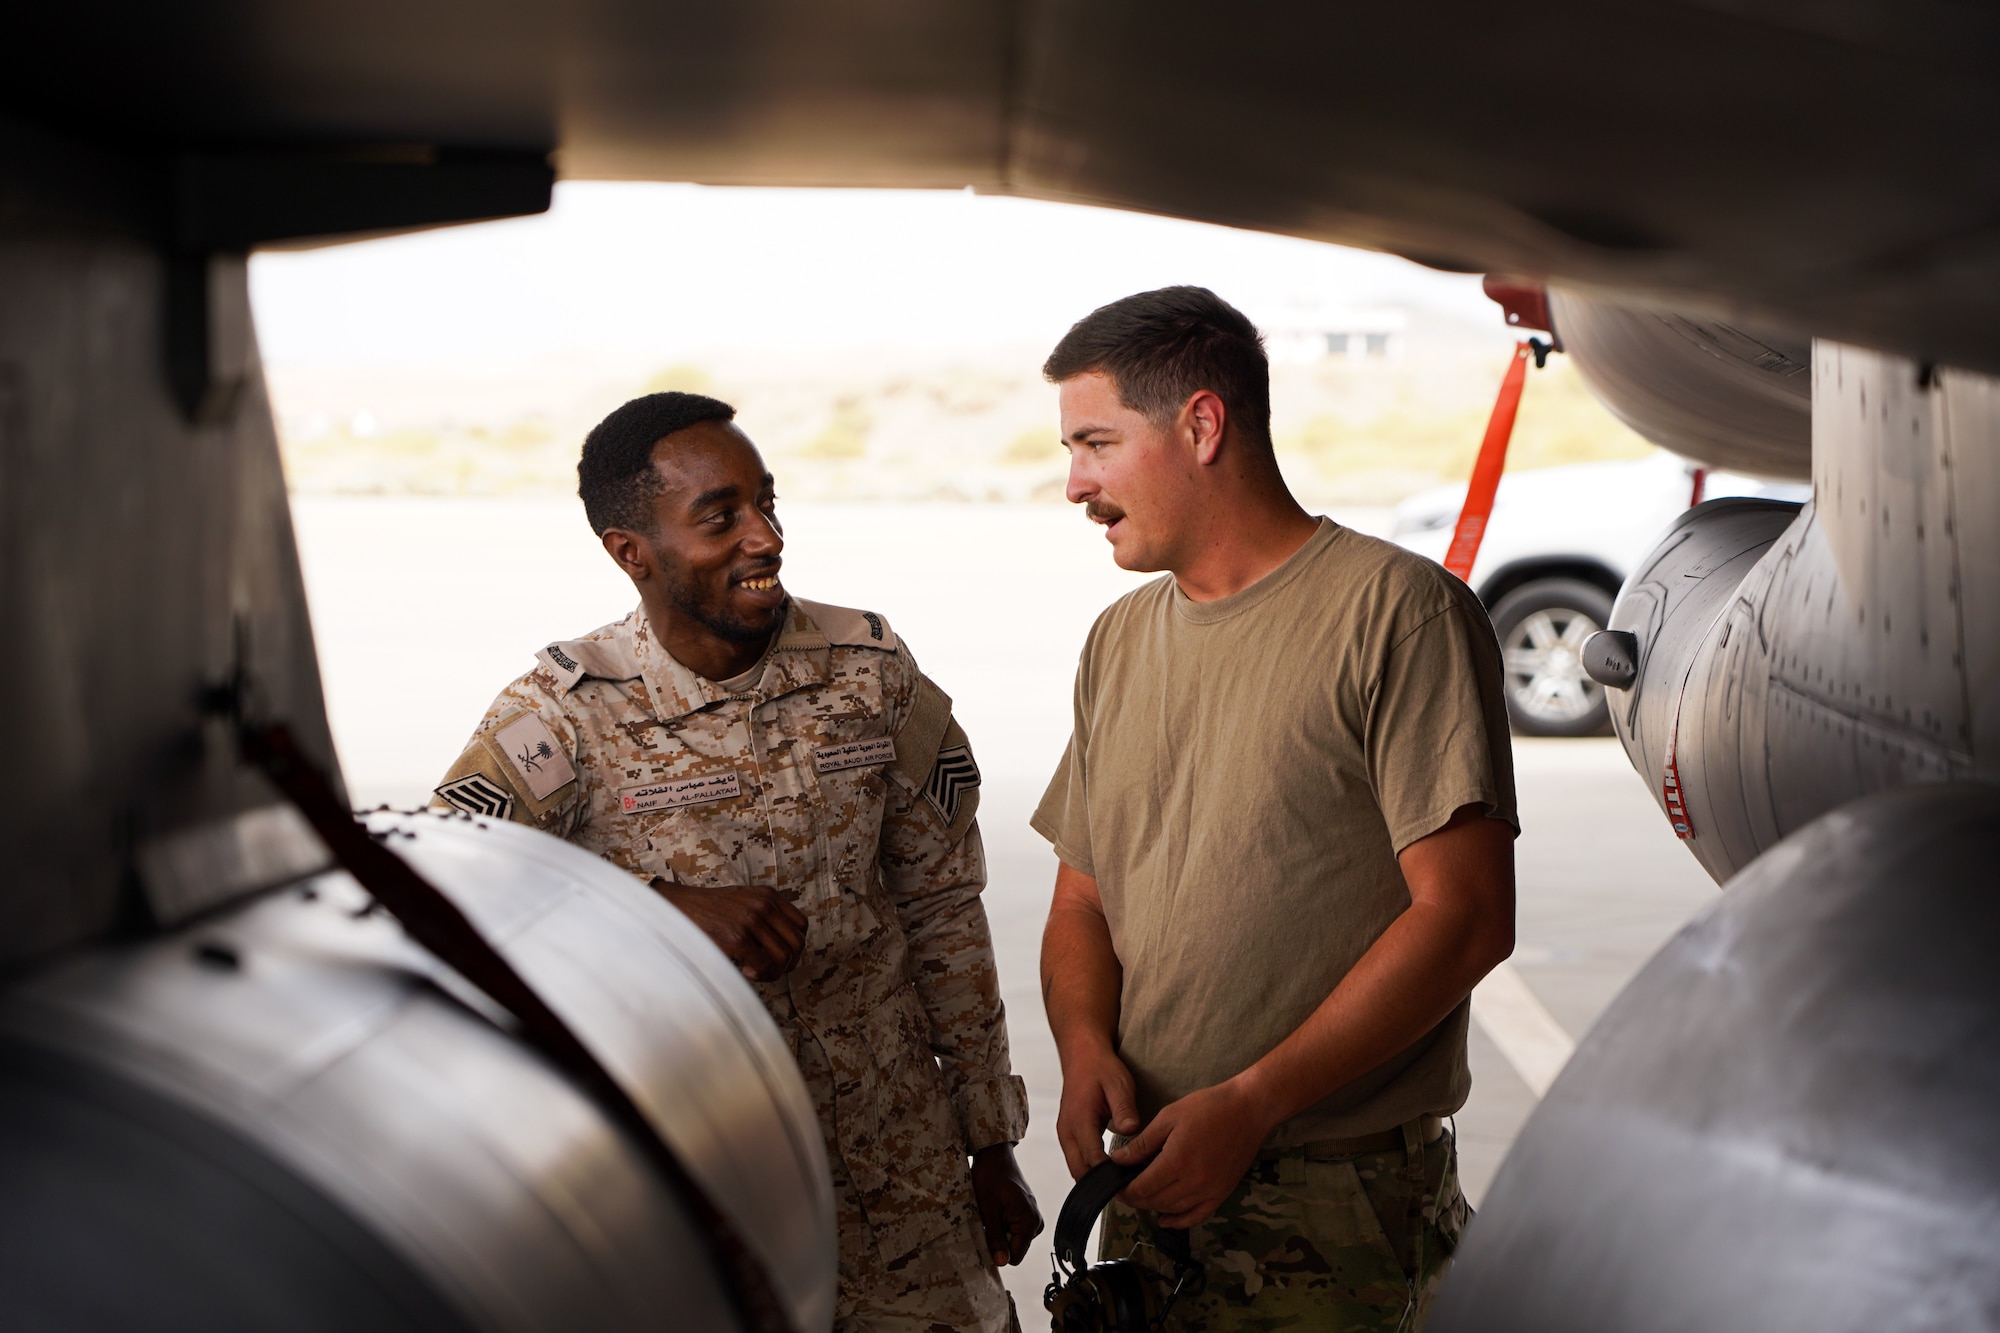 U.S. Air Force Staff Sgt. Jonathan Miles (right), 125th Expeditionary Fighter Generation Squadron (EFGS) crew chief, speaks with a maintainer from the Royal Saudi Air Force (RSAF) during Operation Agile Spartan, Kingdom of Saudi Arabia, Aug. 21, 2023. During the operation, RSAF and 125th EFGS maintainers toured each other's aircraft to see how each partner nation performs their maintenance duties. Agile Spartan 23.2 is a multinational operation aimed at strengthening interoperability, improving response capabilities, and furthering security cooperation initiatives throughout the U.S. Central Command area of responsibility. (U.S. Air Force photo by Tech. Sgt. Alexander Frank)